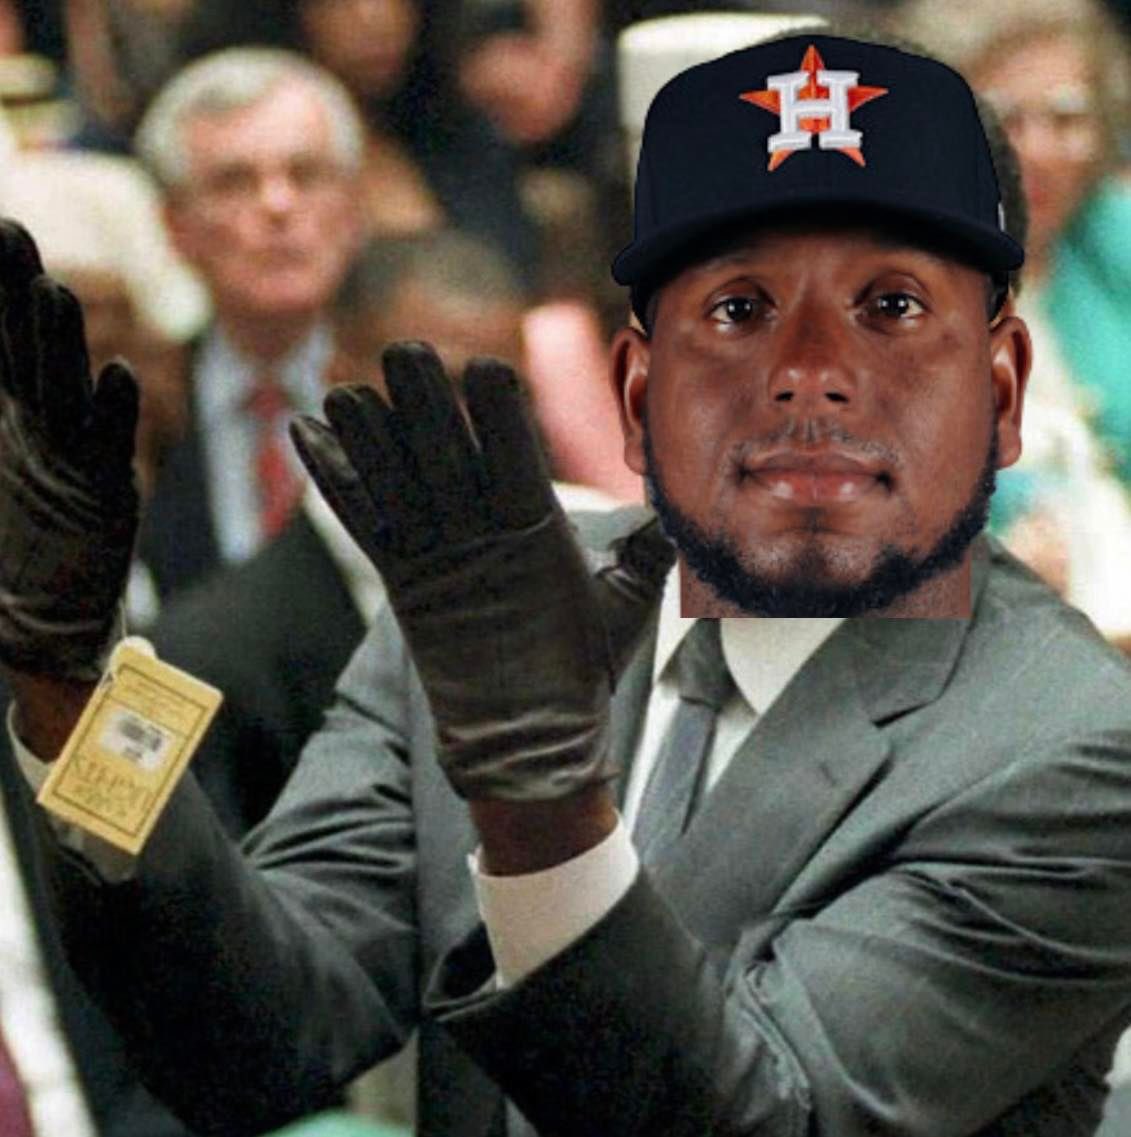 “If the glove don’t stick, you must acquit” 
-Ronel Blanco

#Houstonastros